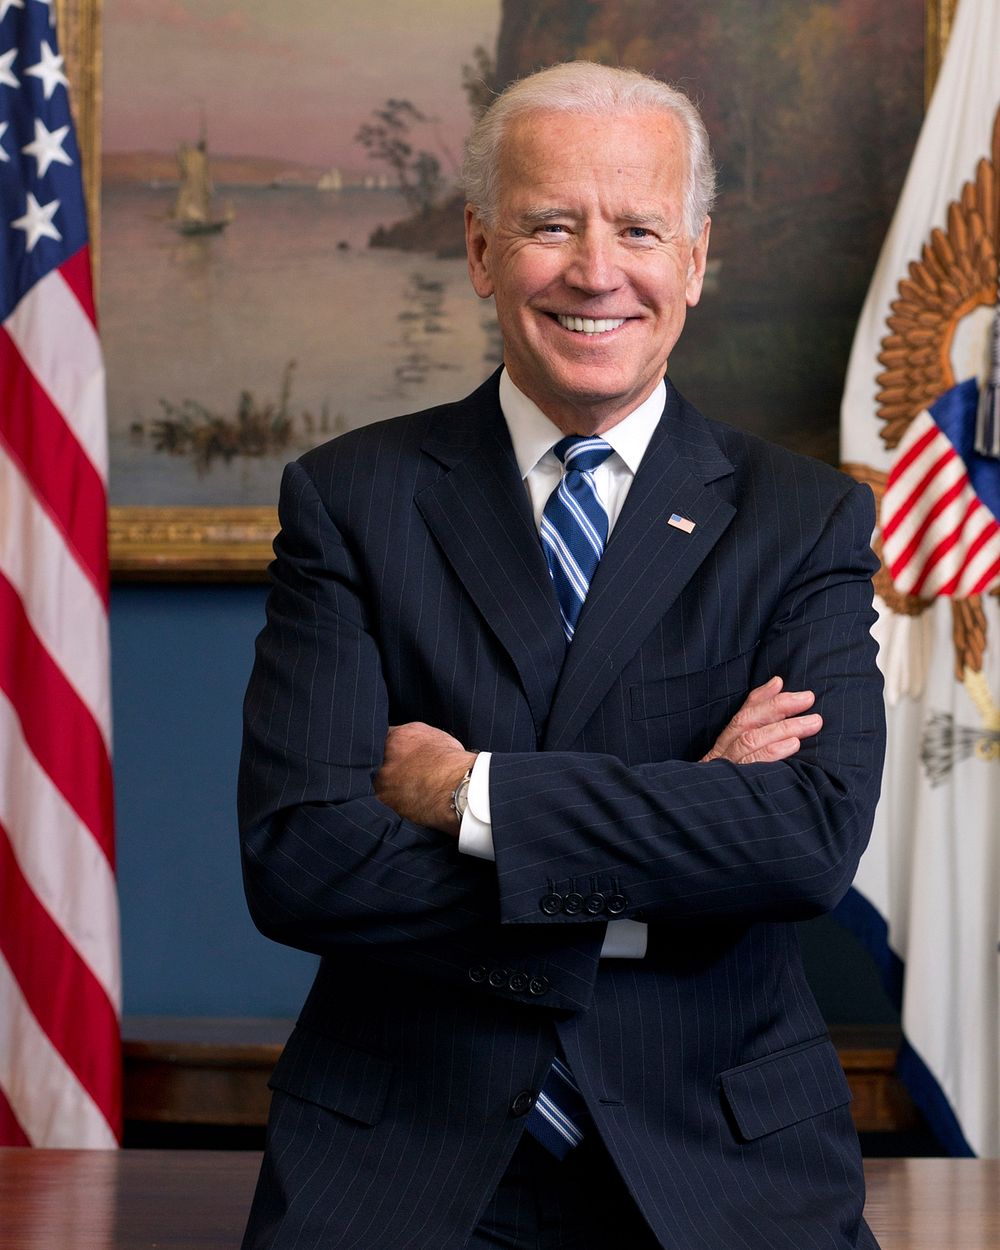 Official portrait of Vice President Joe Biden in his West Wing Office at the White House, Jan. 10, 2013.